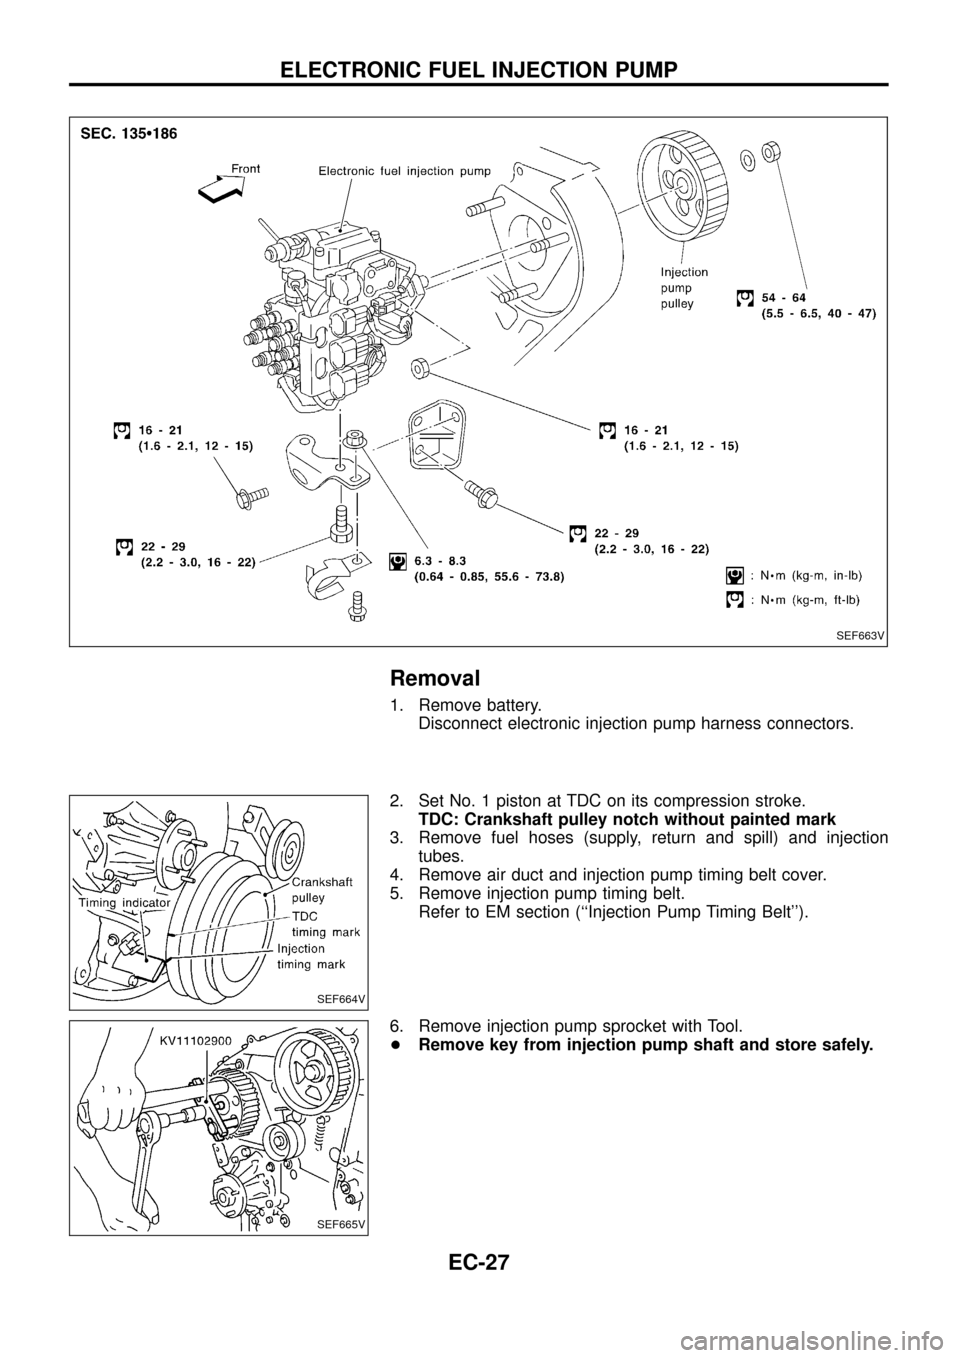 NISSAN PATROL 1998 Y61 / 5.G Engine Control Owners Manual Removal
1. Remove battery.
Disconnect electronic injection pump harness connectors.
2. Set No. 1 piston at TDC on its compression stroke.
TDC: Crankshaft pulley notch without painted mark
3. Remove fu